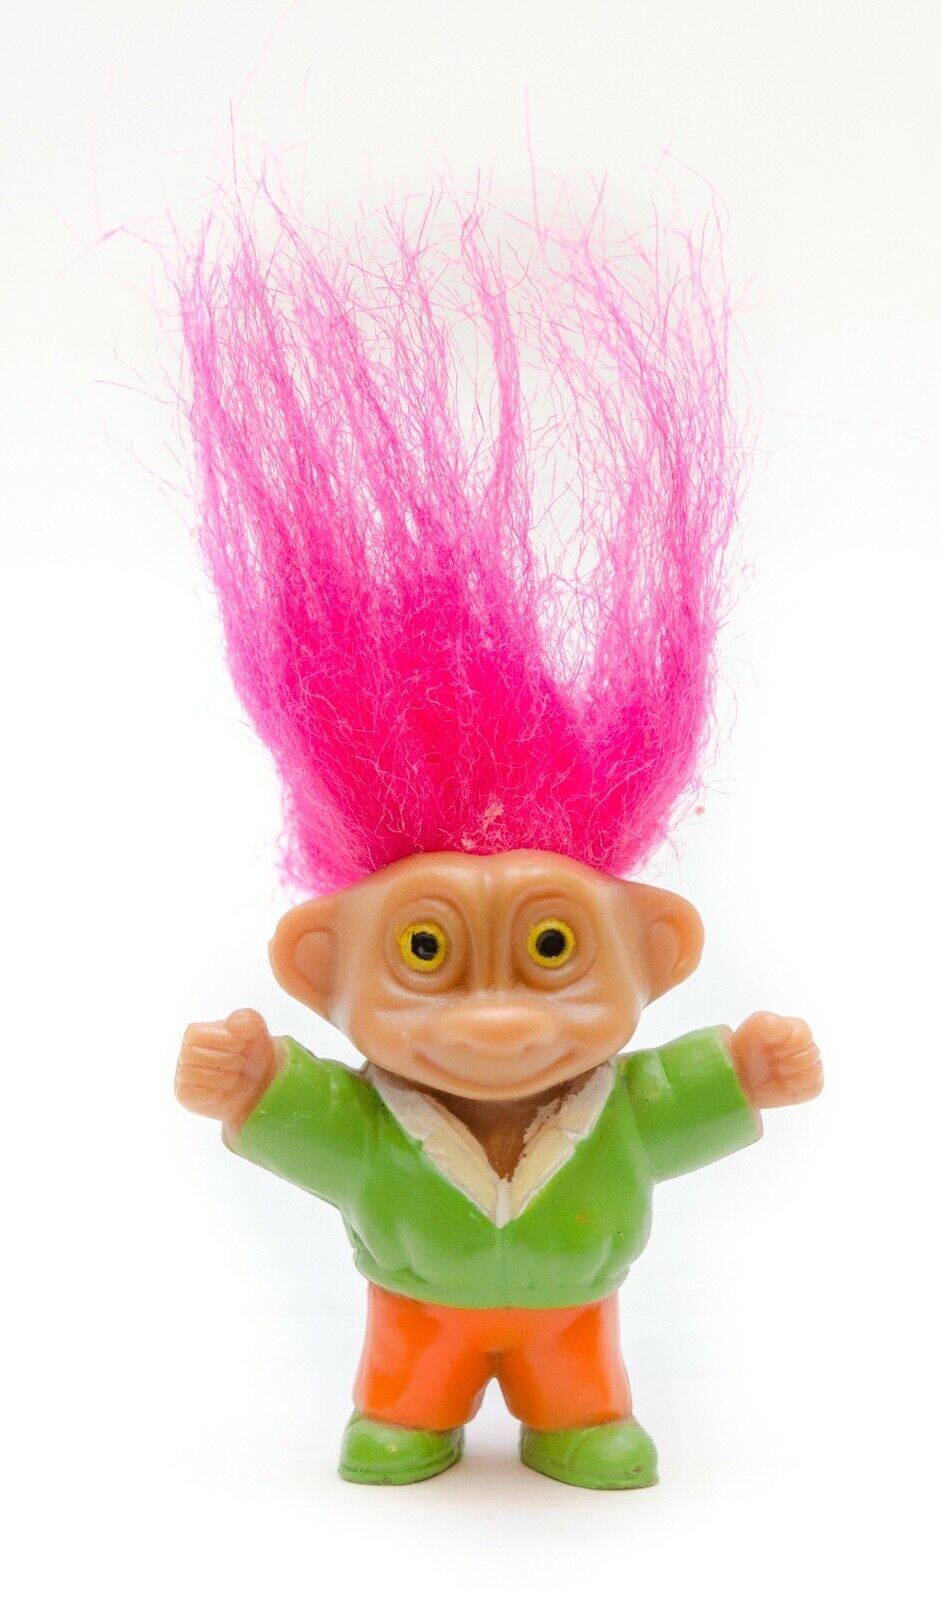 Soma Small Troll Doll, Pink Hair Yellow Eyes Green Suit Vintage - $11.85